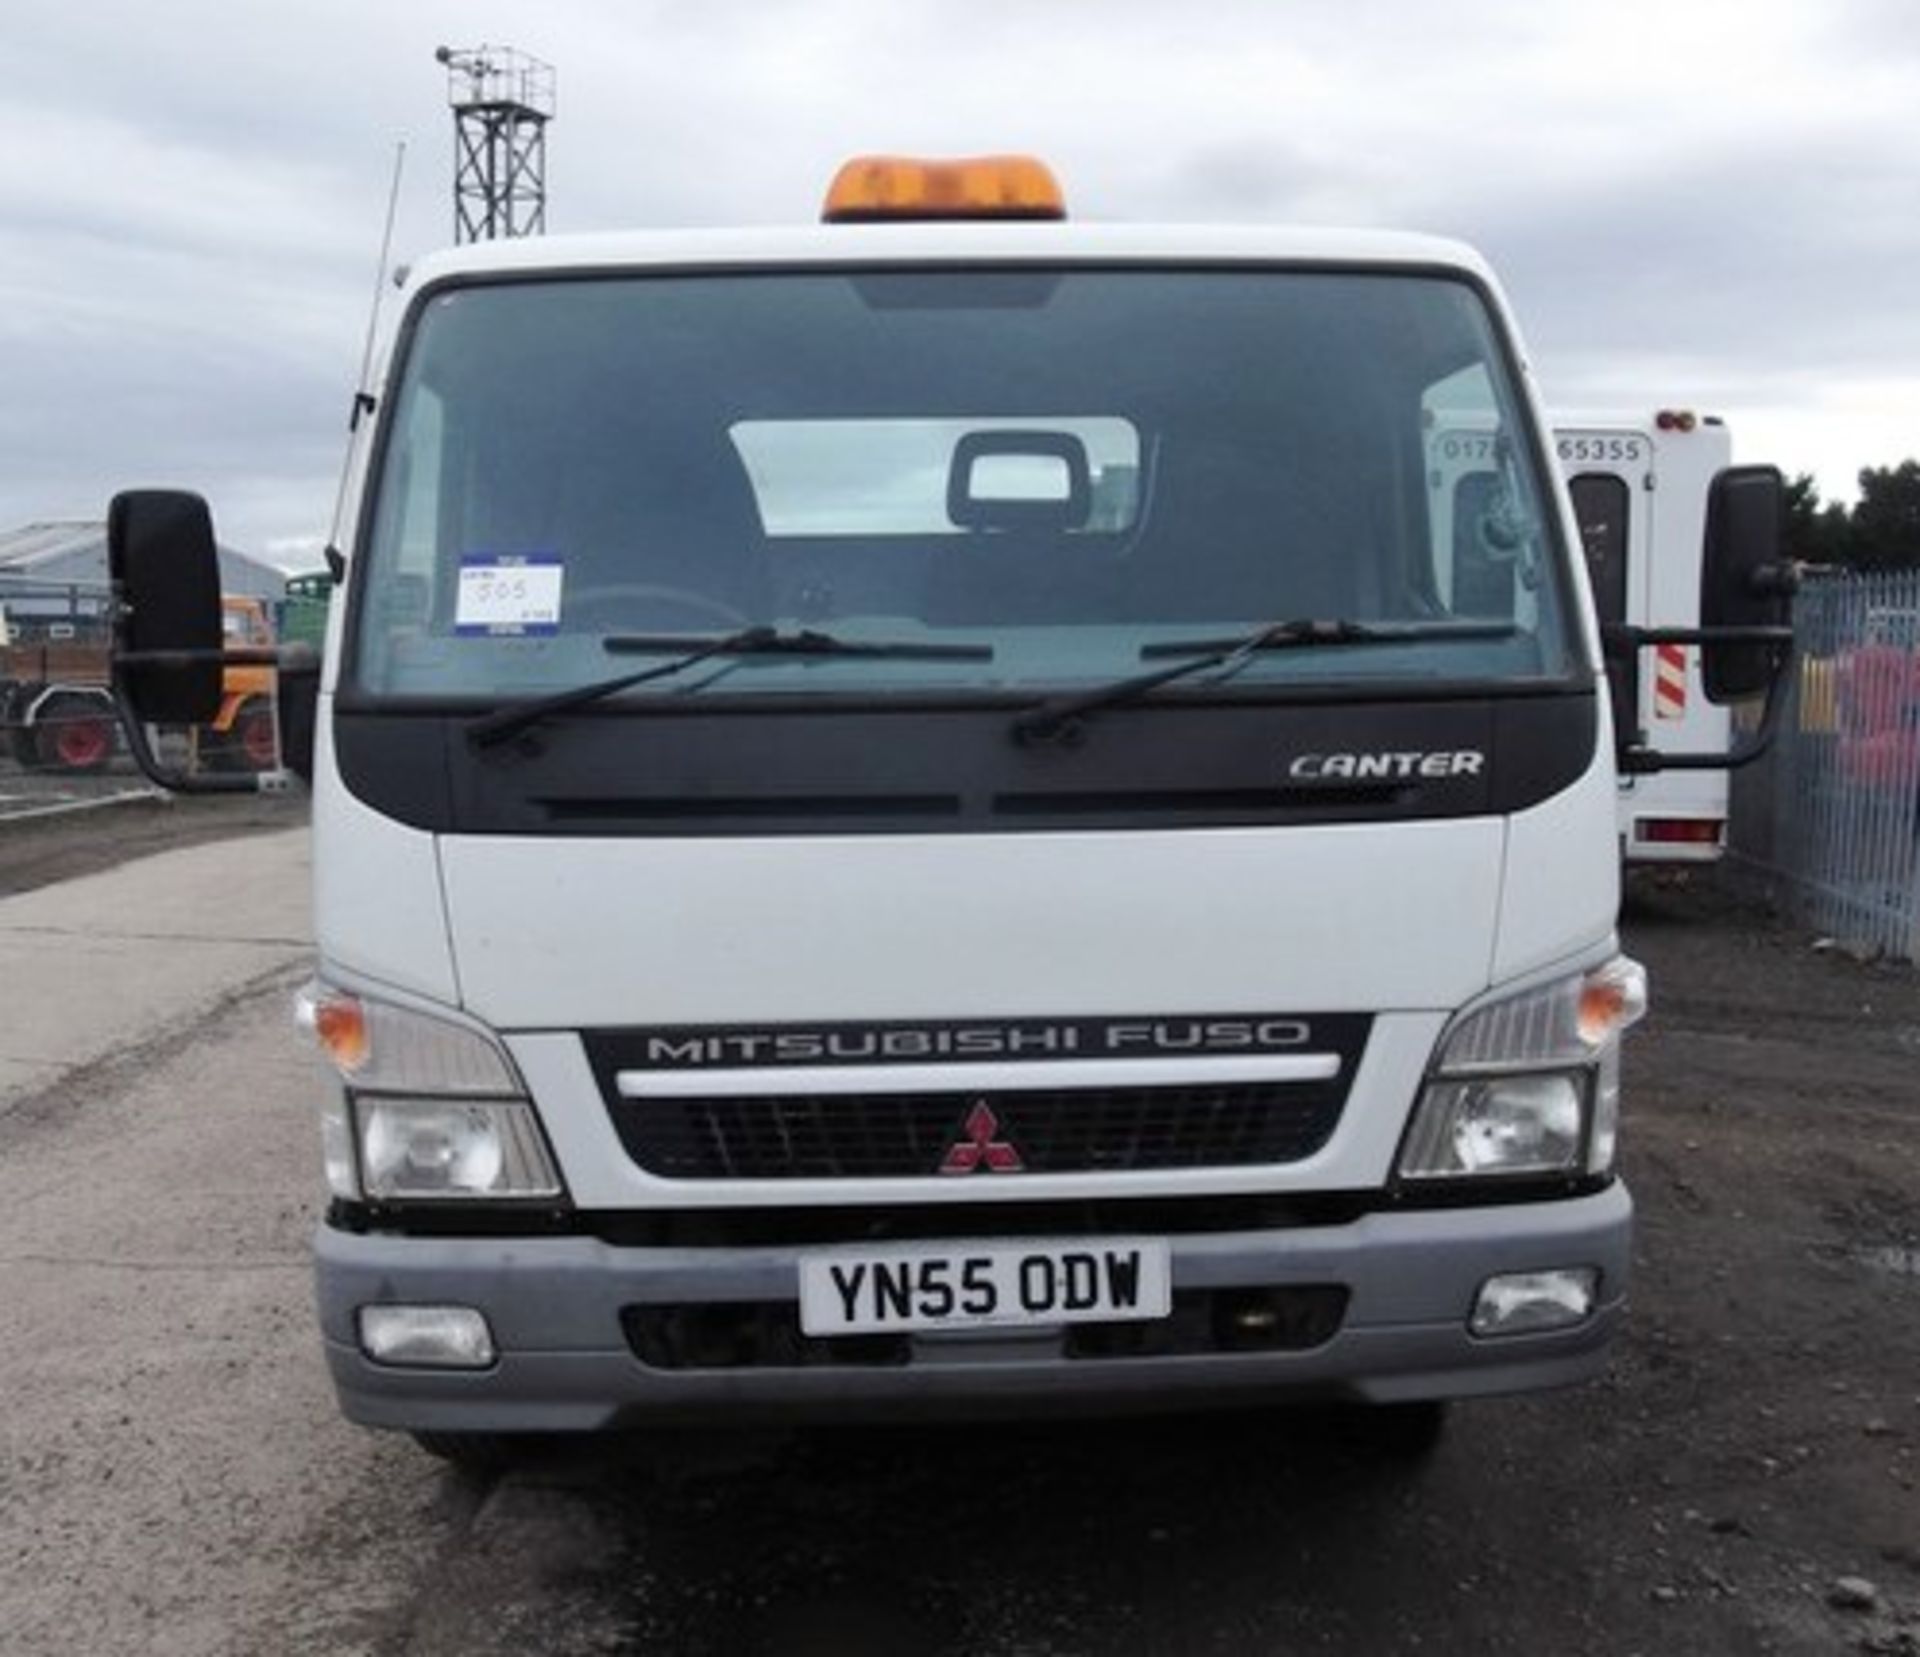 MITSUBISHI CANTER 75 7C14 - 3908cc
Body: 2 Dr Truck
Color: White
First Reg: 01/09/2005
Doors: 2
MOT: - Image 12 of 16